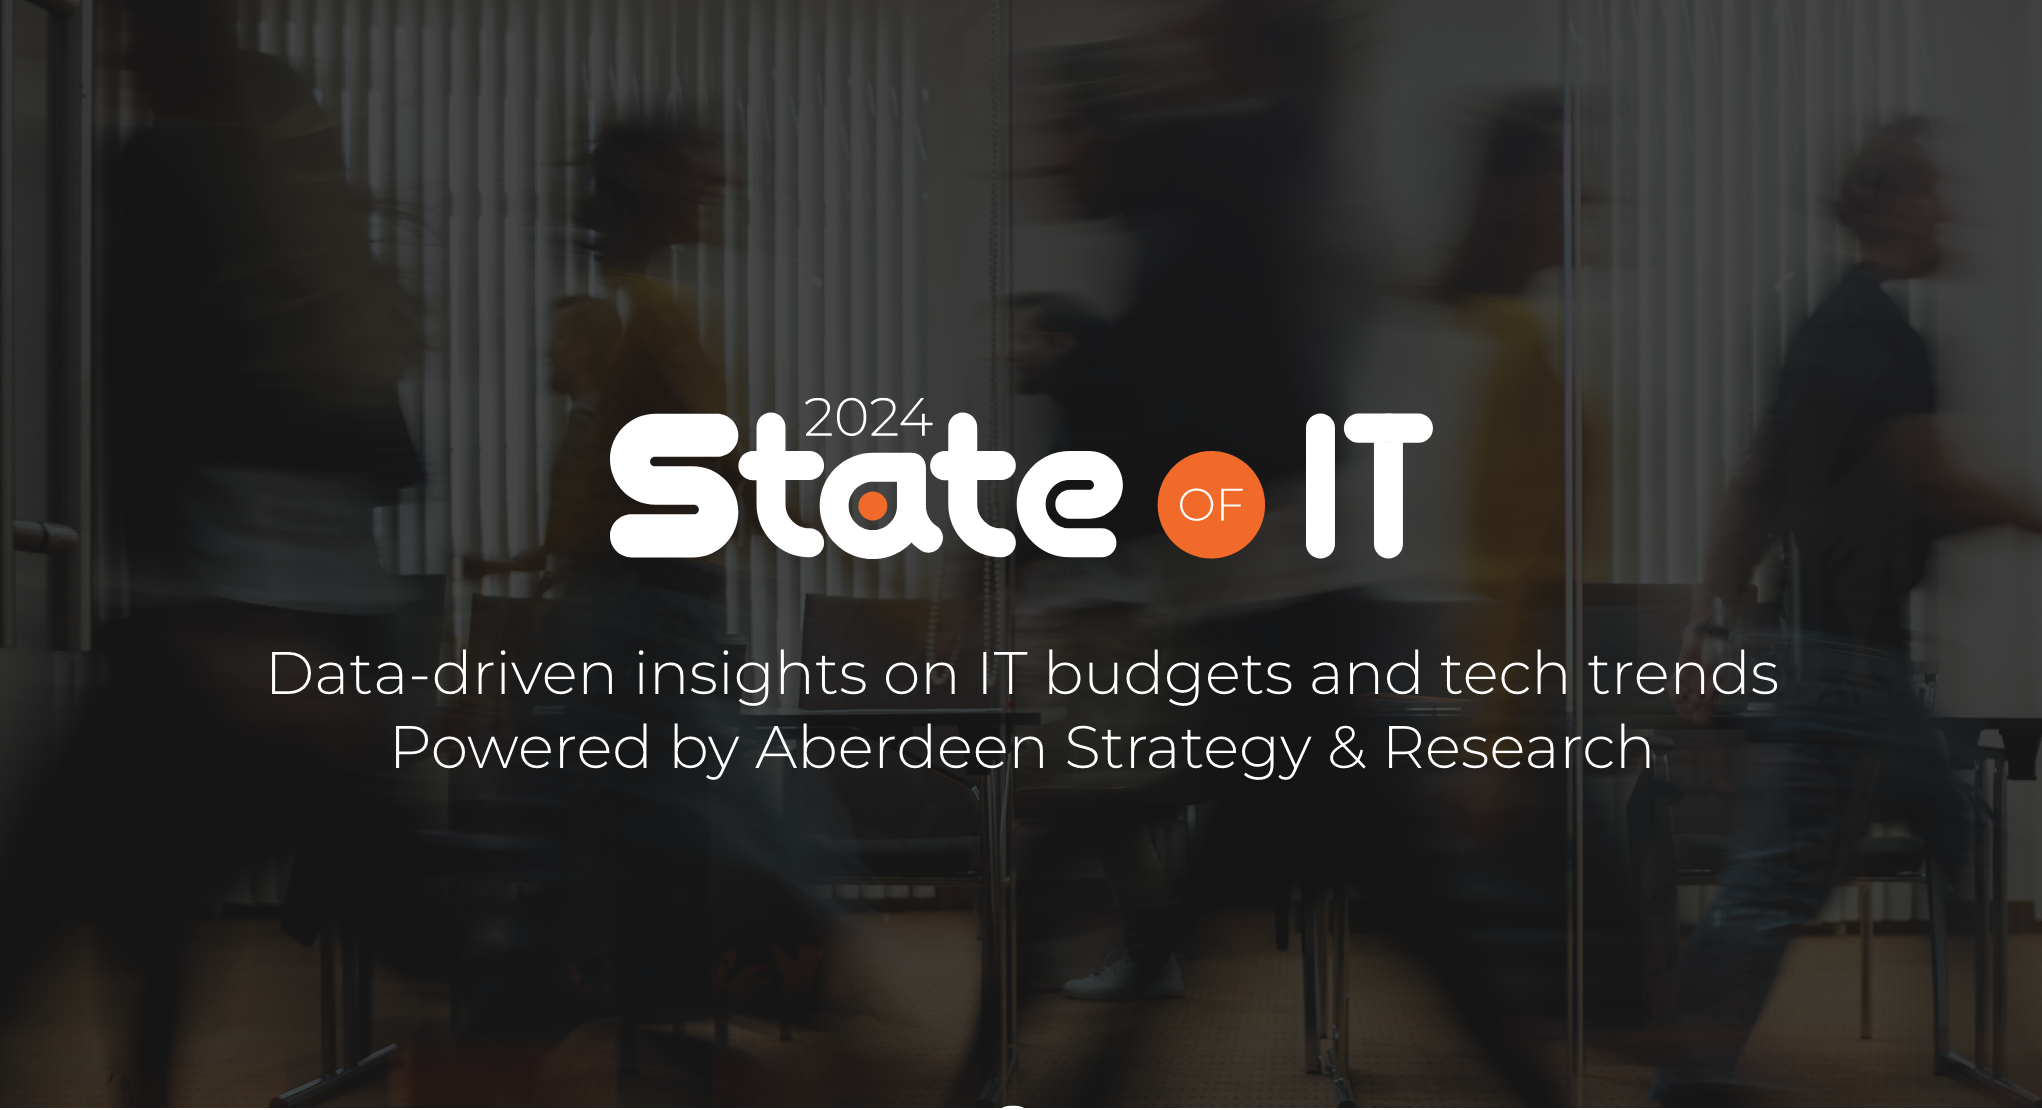 The 2024 State of IT Report